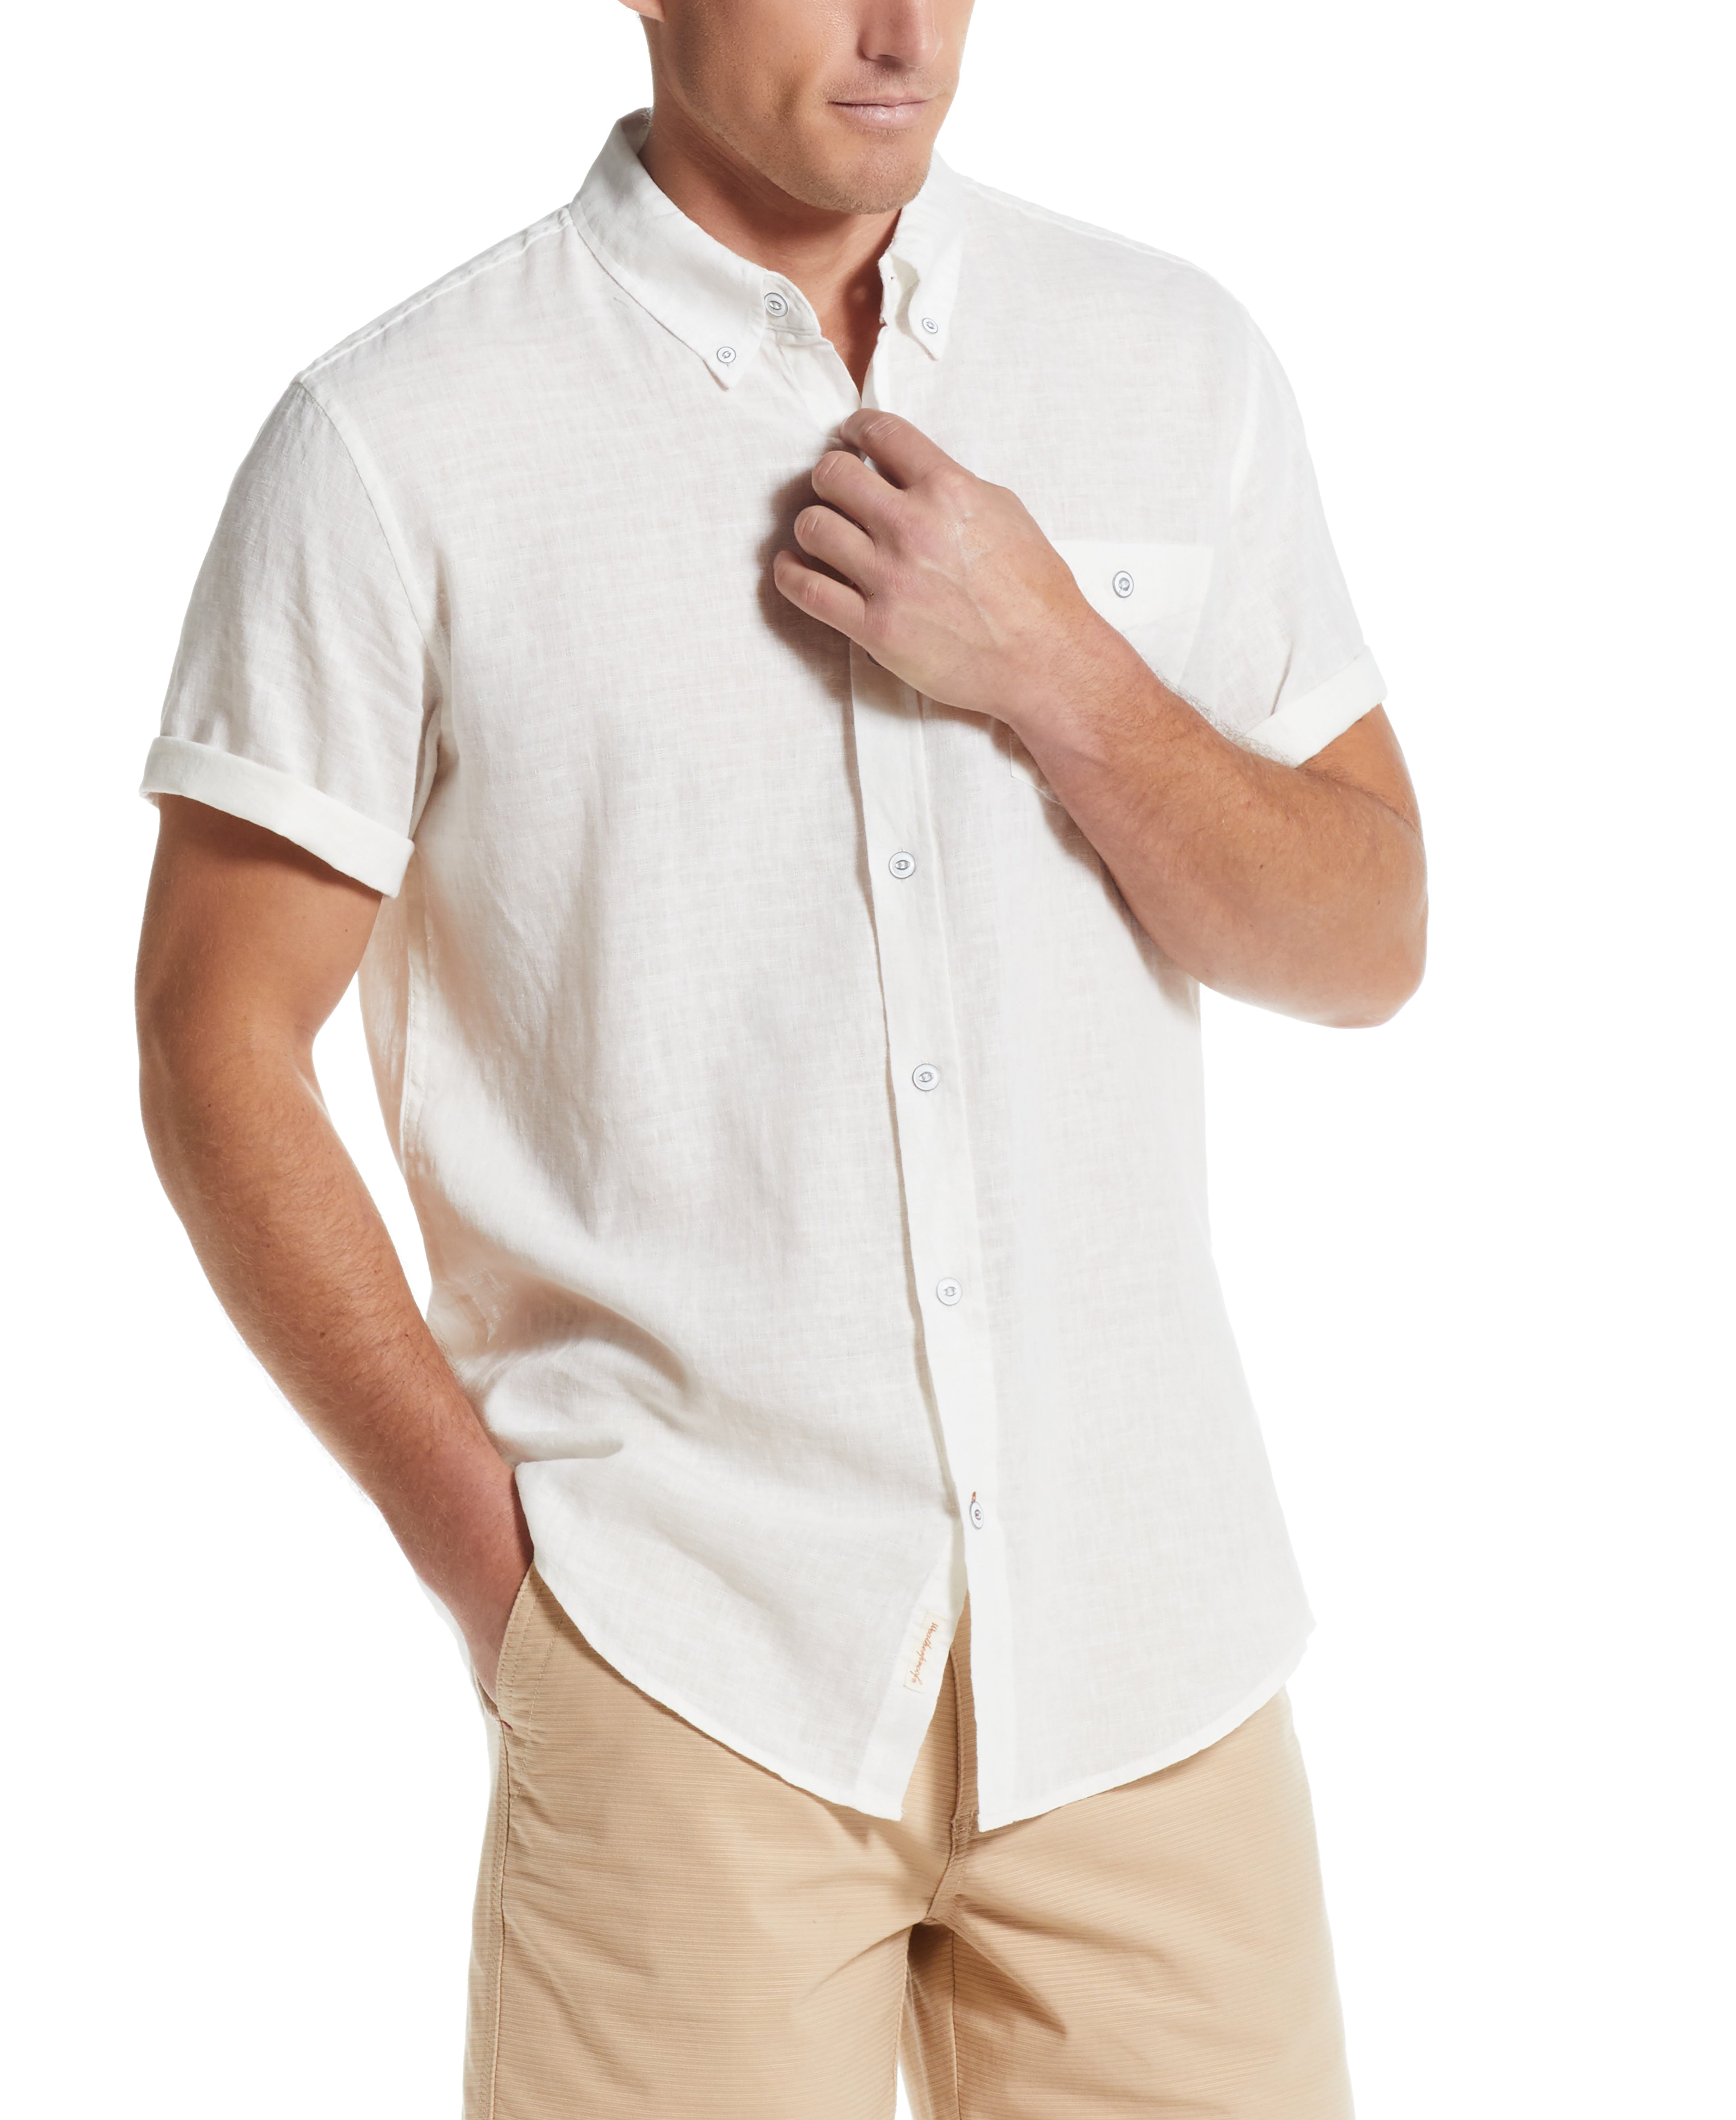 SHORT SLEEVE SOLID LINEN COTTON in BRIGHT WHITE